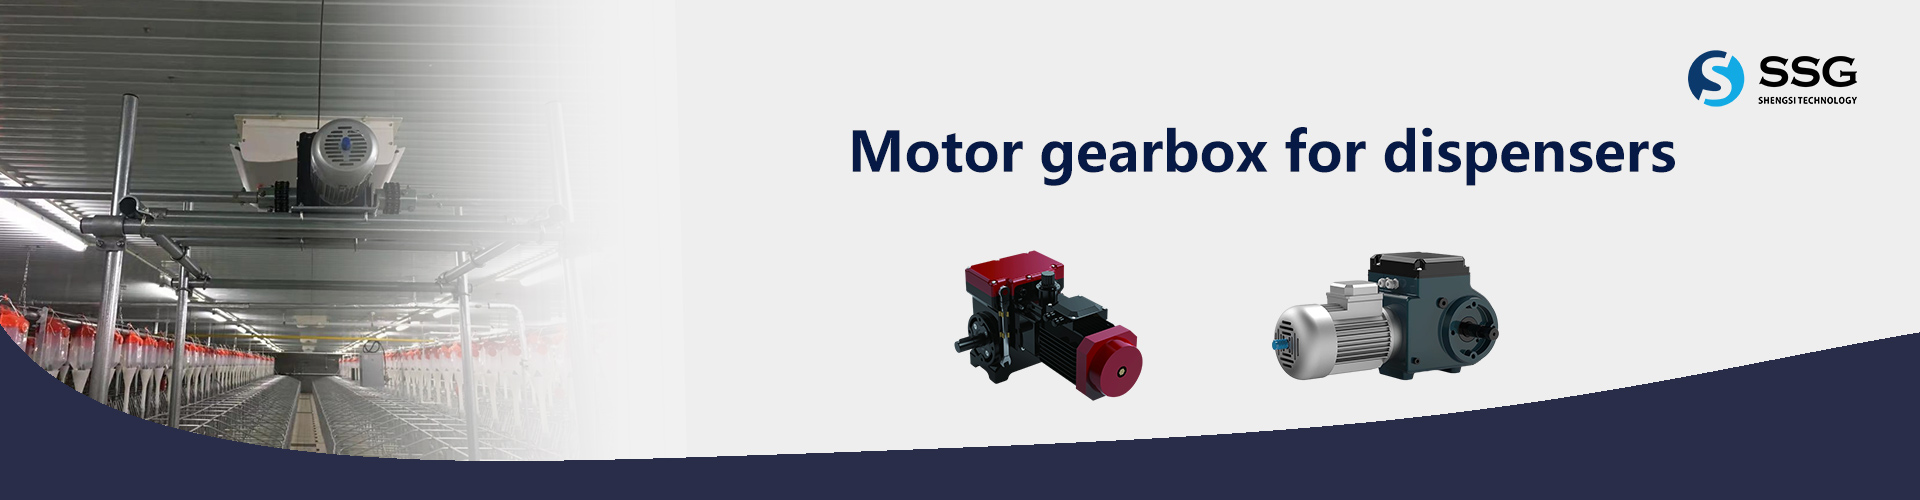 MOTOR-GEARBOX-FOR-DISPENSERS-banner